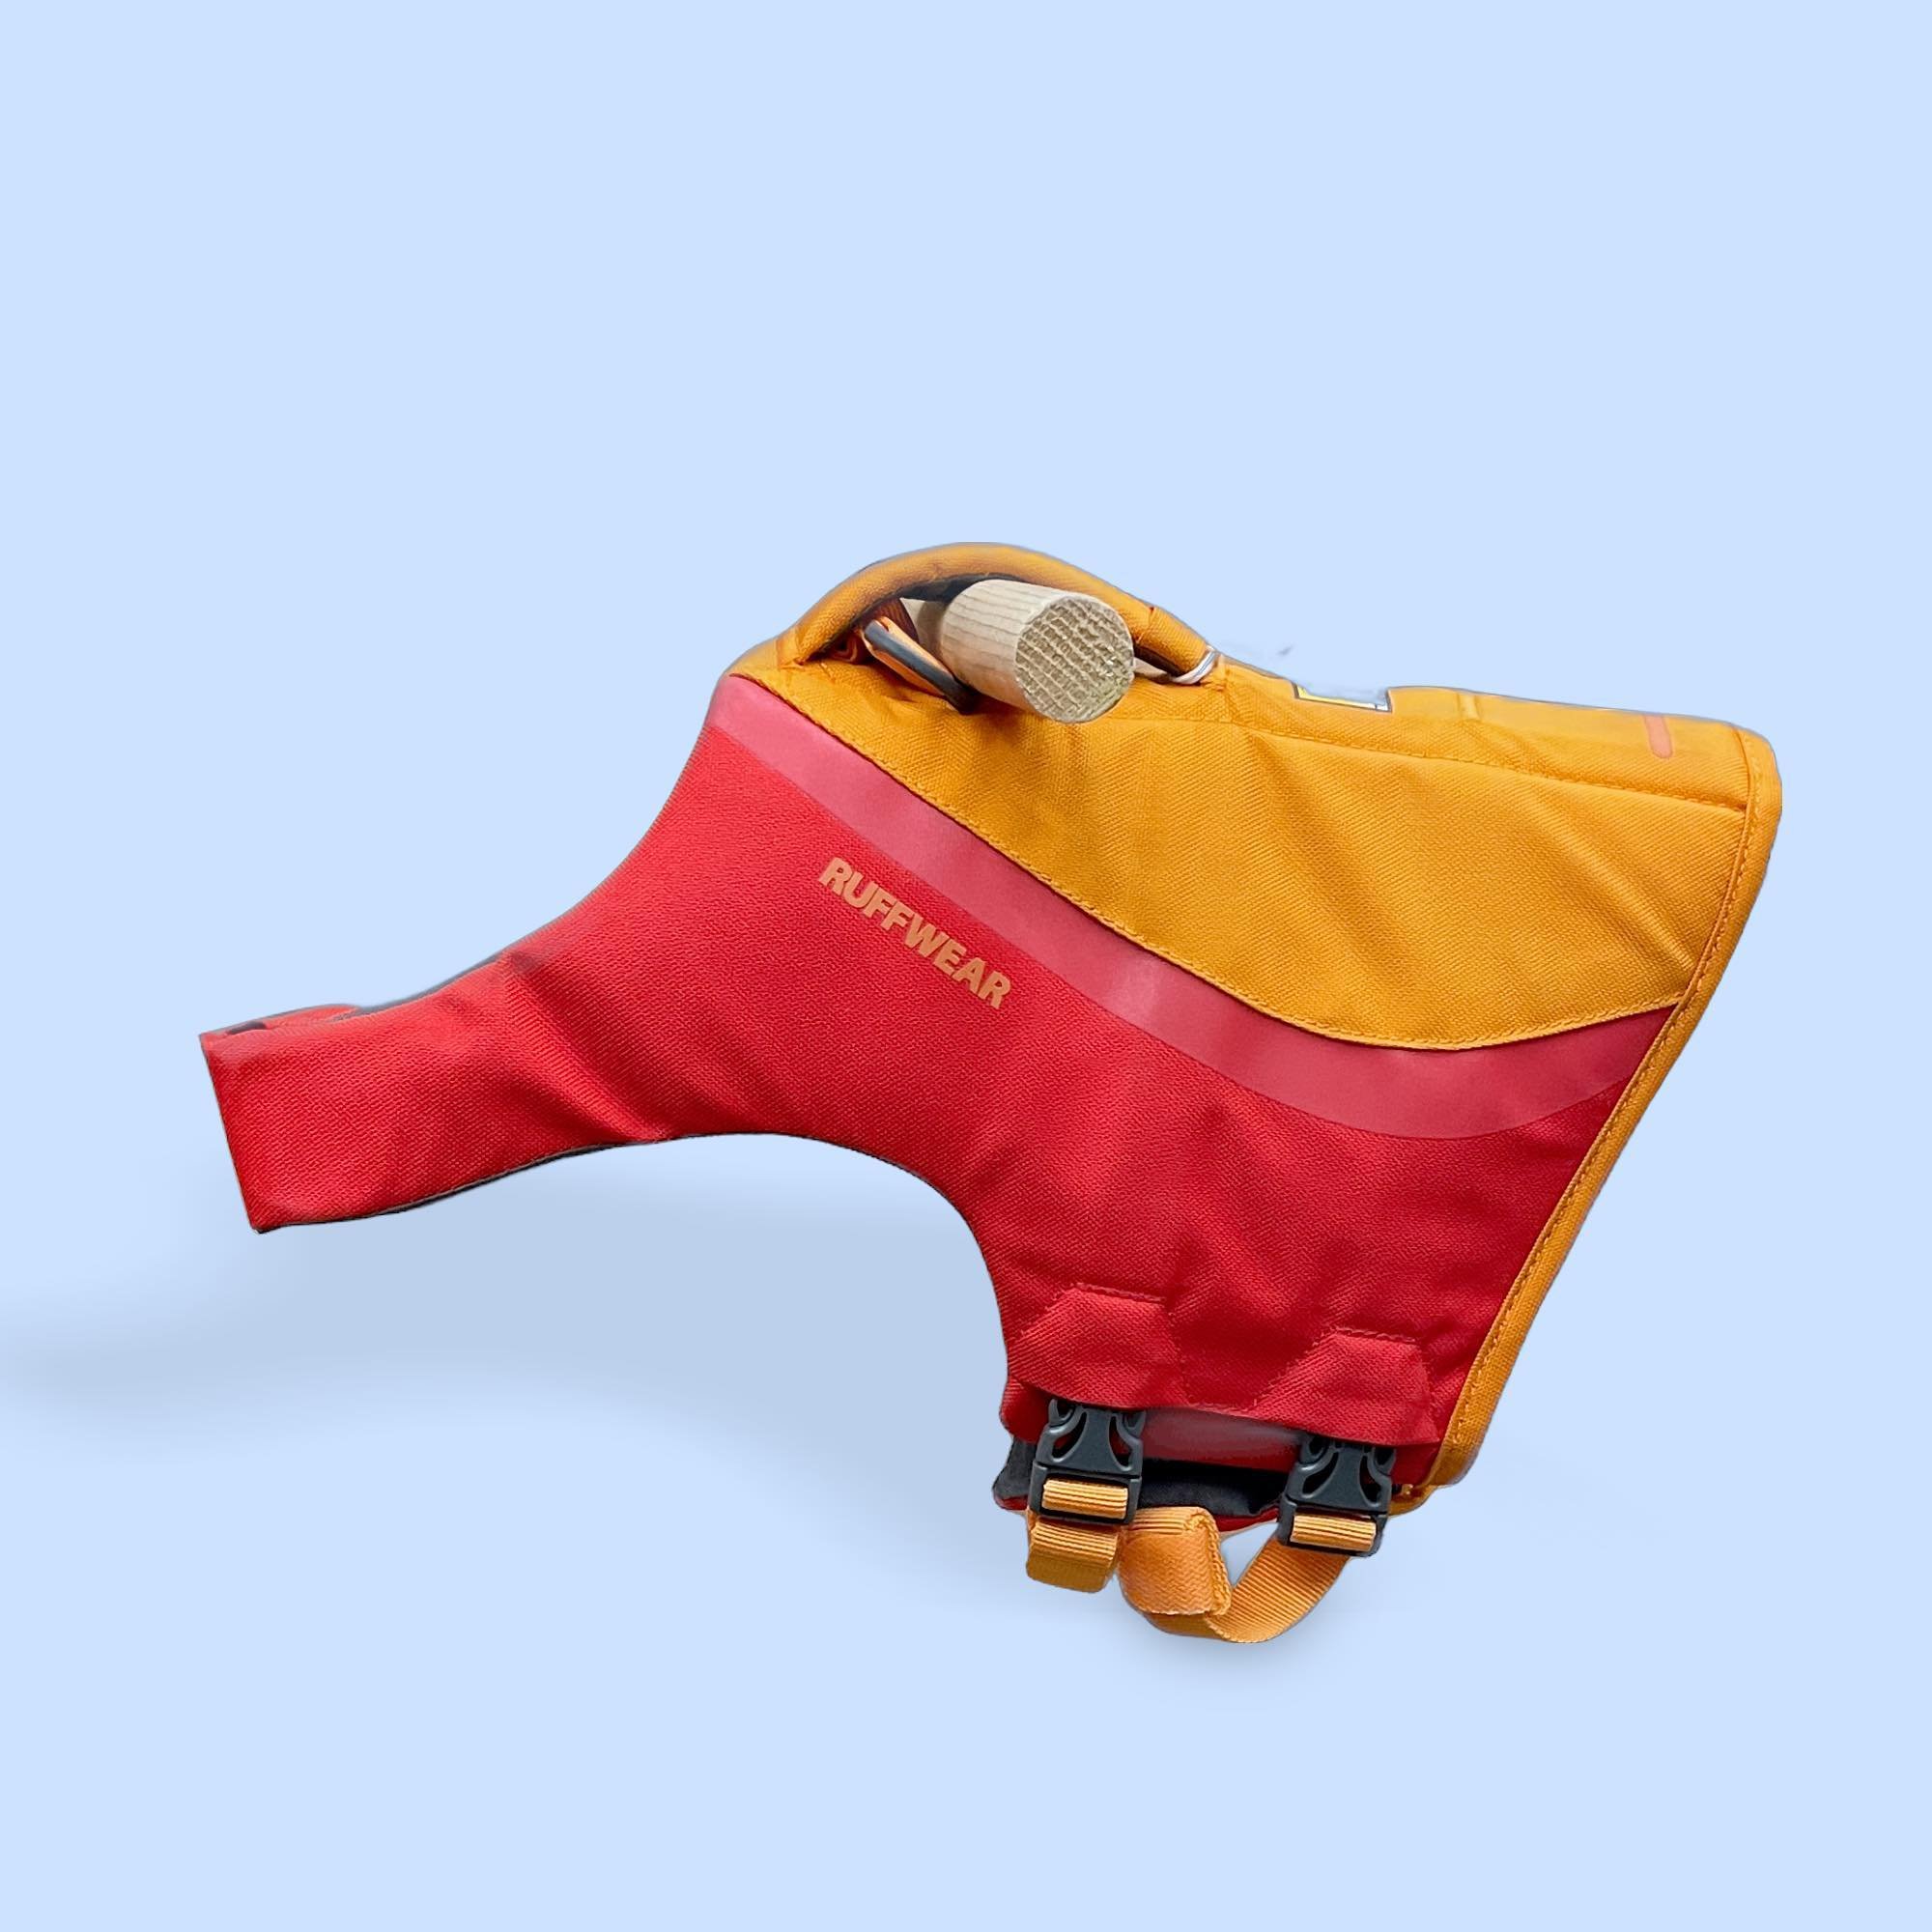 Keep your puppers safe and a float with this Ruffwear Dog Life Jacket 
Size: Extra Small

MSRP: $89
CC: $ 39